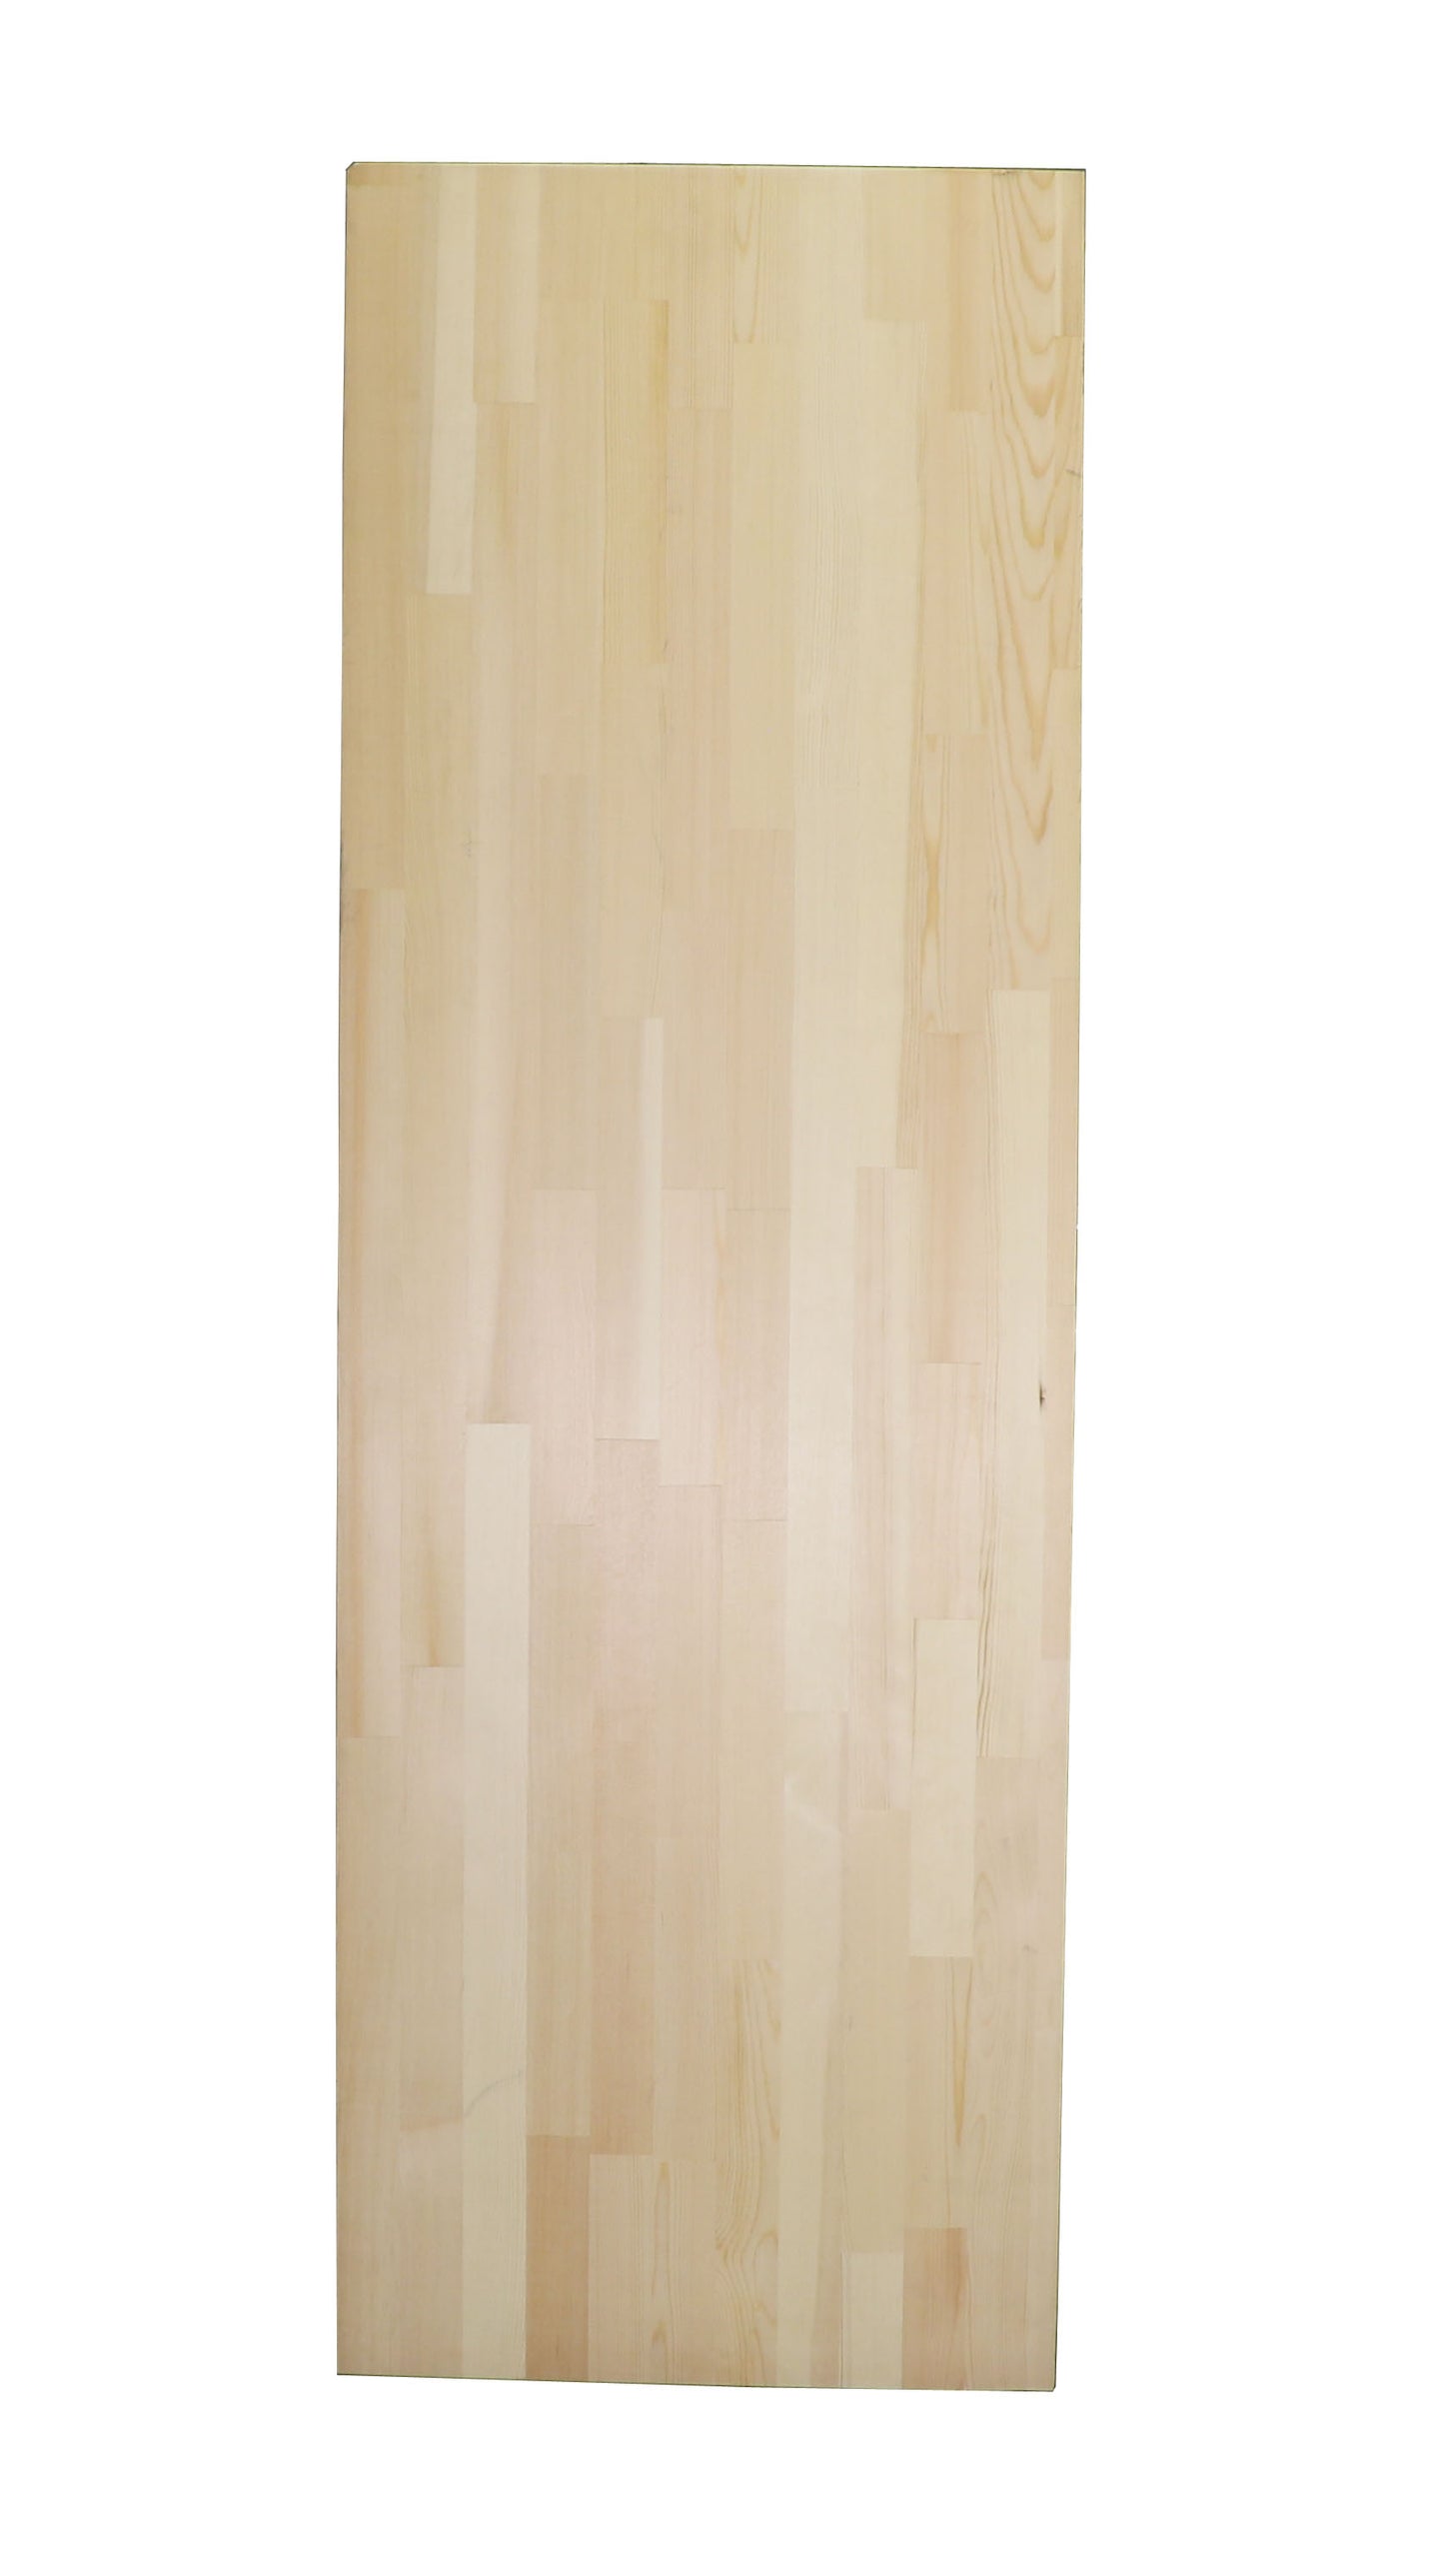 Solid Wood Board - Finger Joint Pine Scot/Red  -  Grade AA - Unfinished 3/4" x 16" x 8'